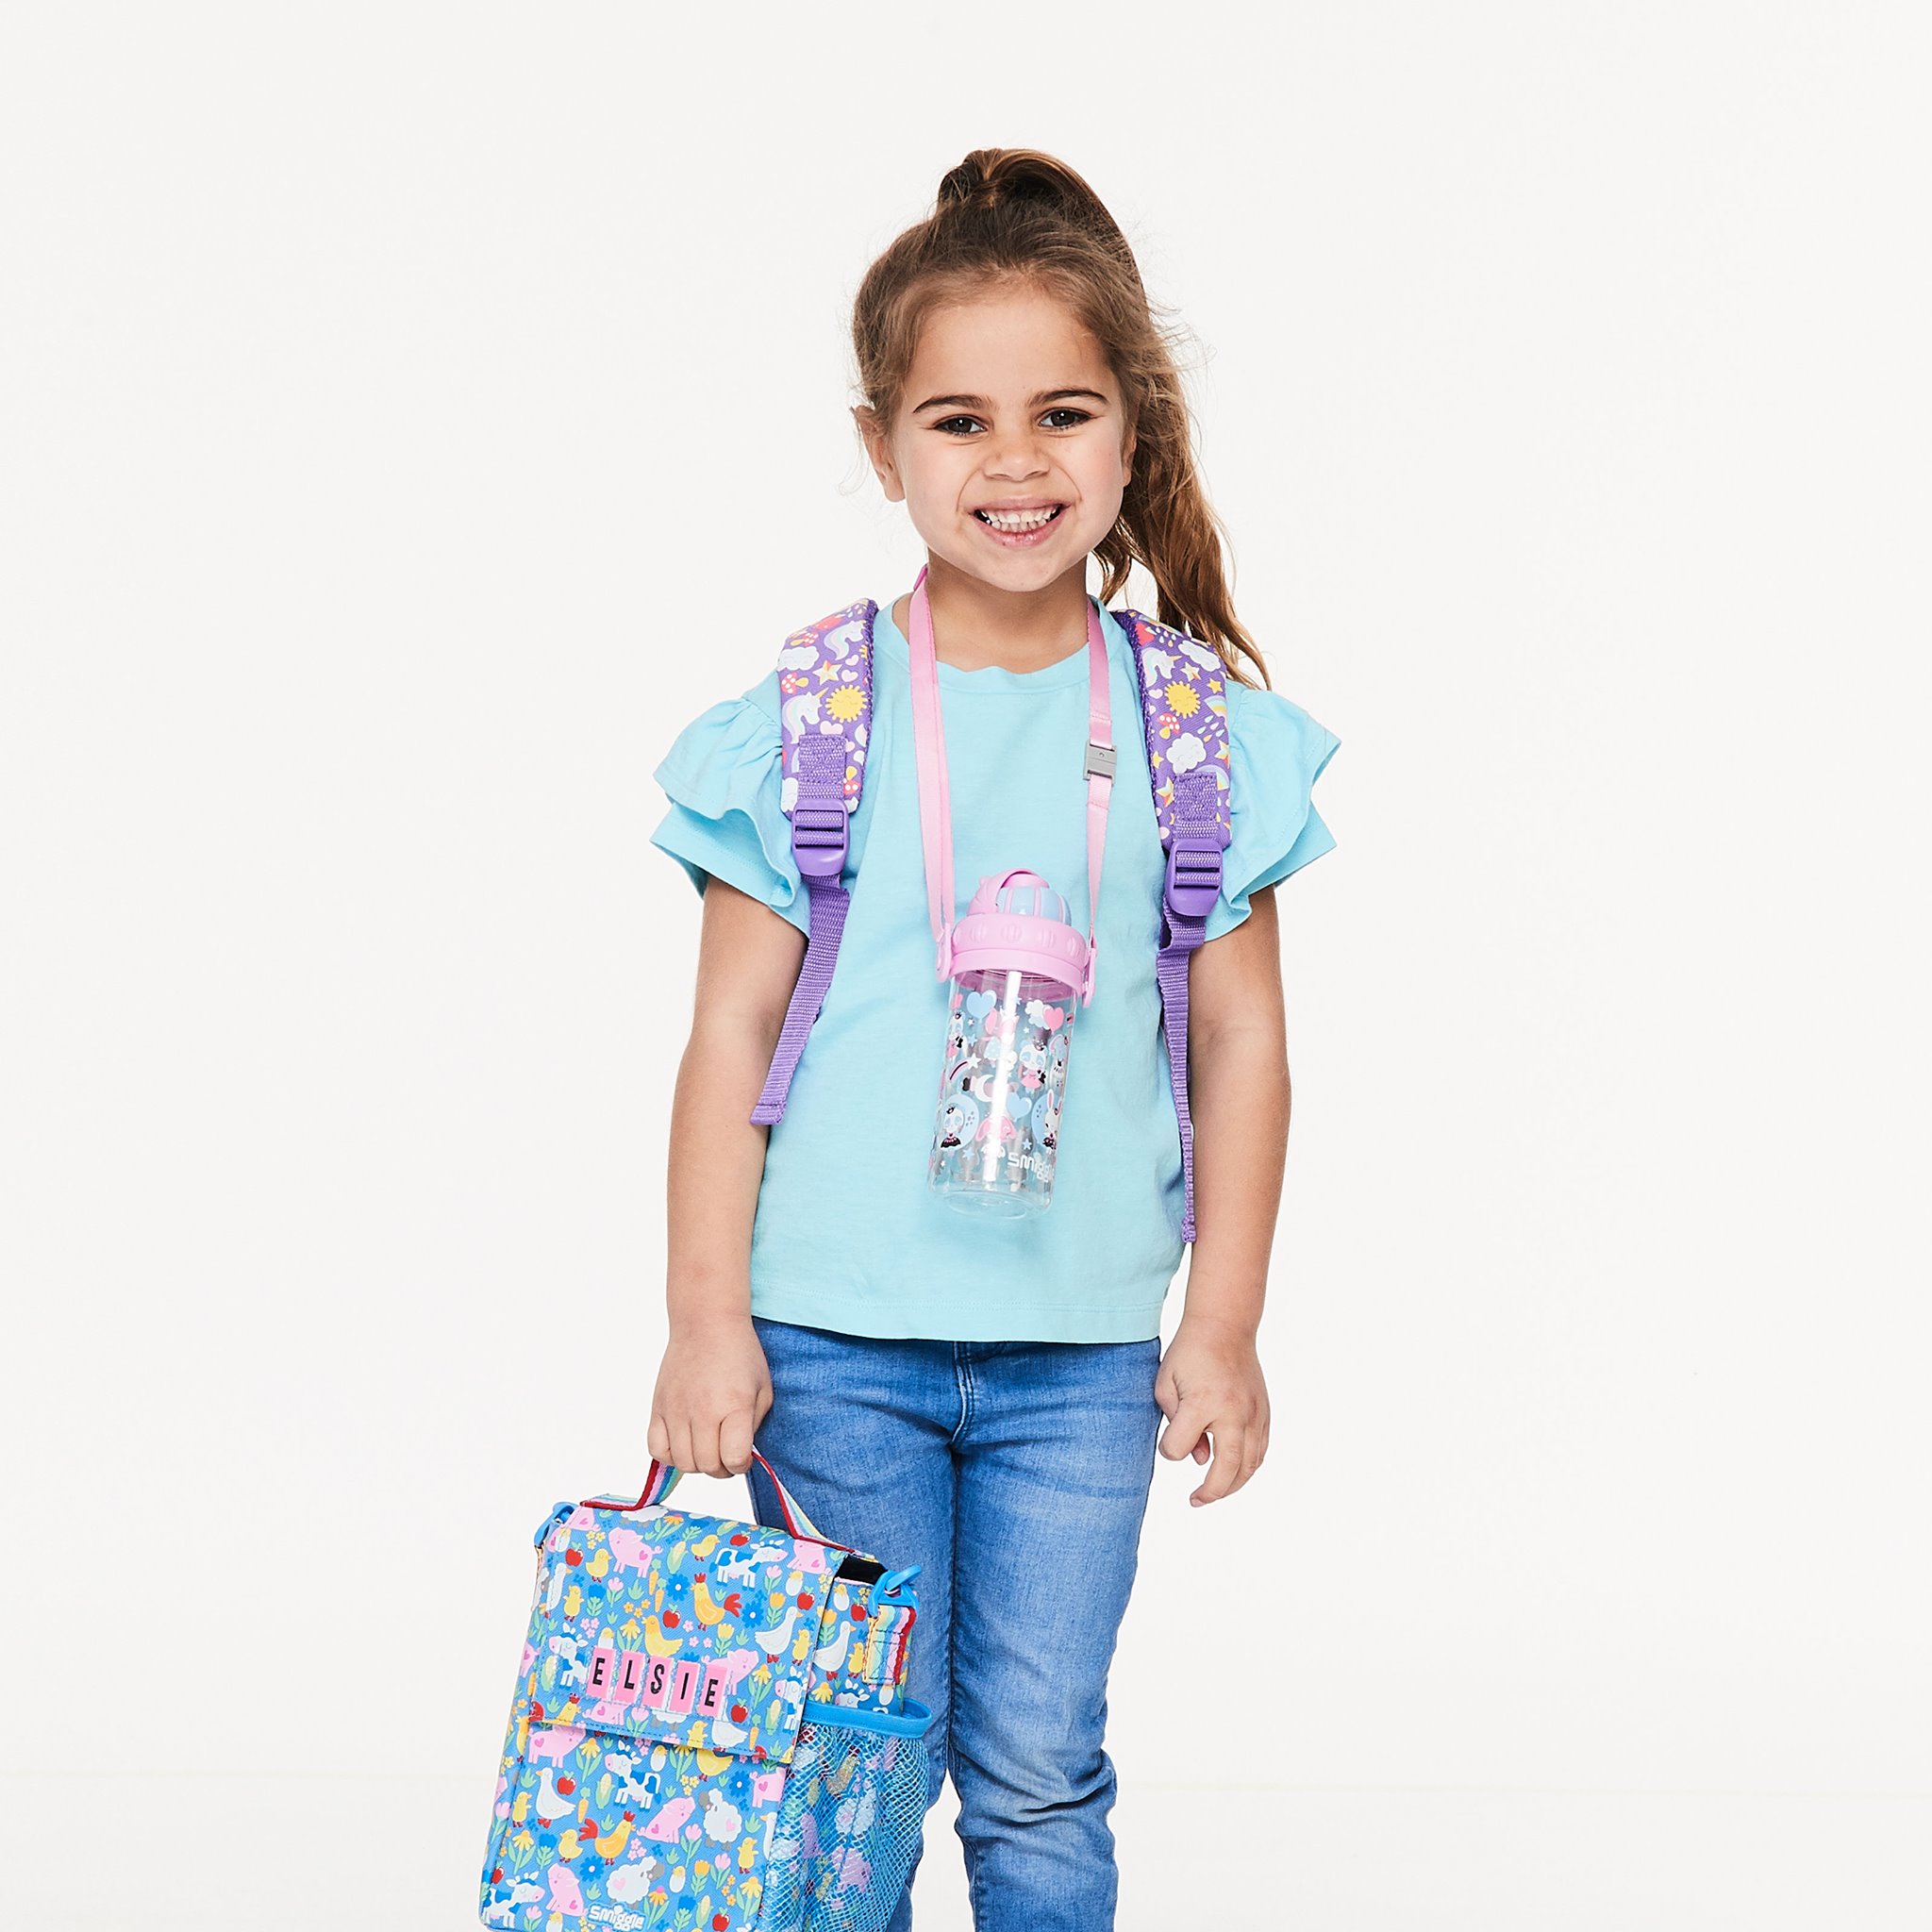 Perfect for preschool! 😍 Shop our latest junior collection WINK instore now!